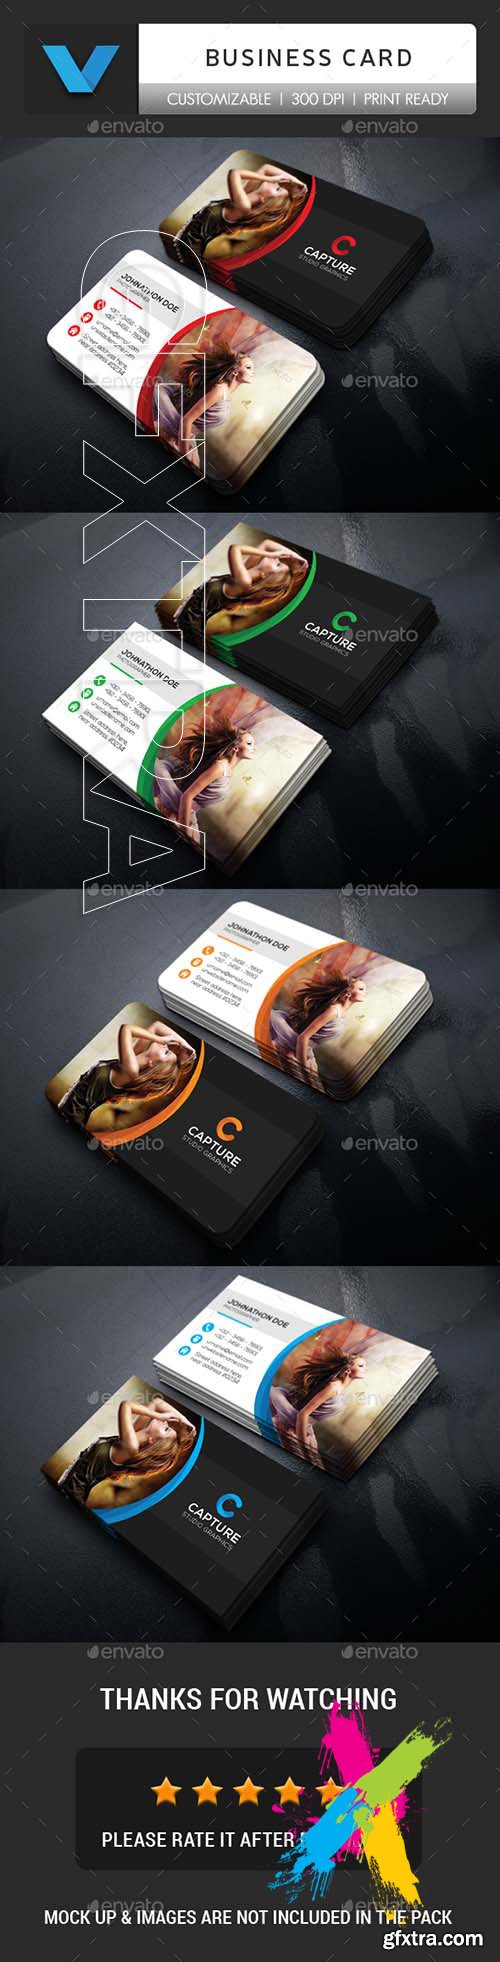 GraphicRiver - Photography Business Card 20833181